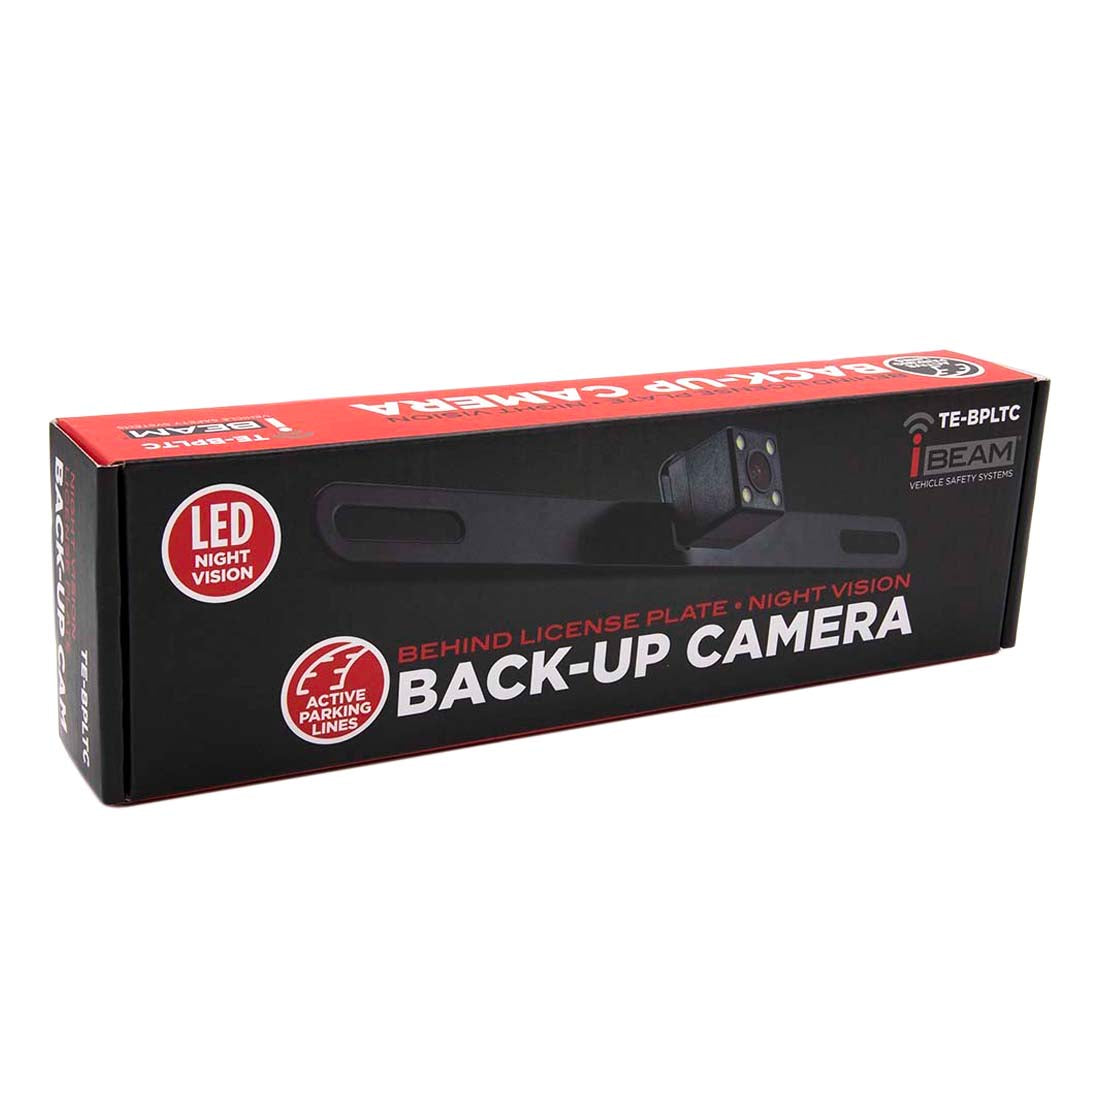 iBeam TE-BPLTC Behind License Plate Mount Back-Up Camera w/ LED Night Vision